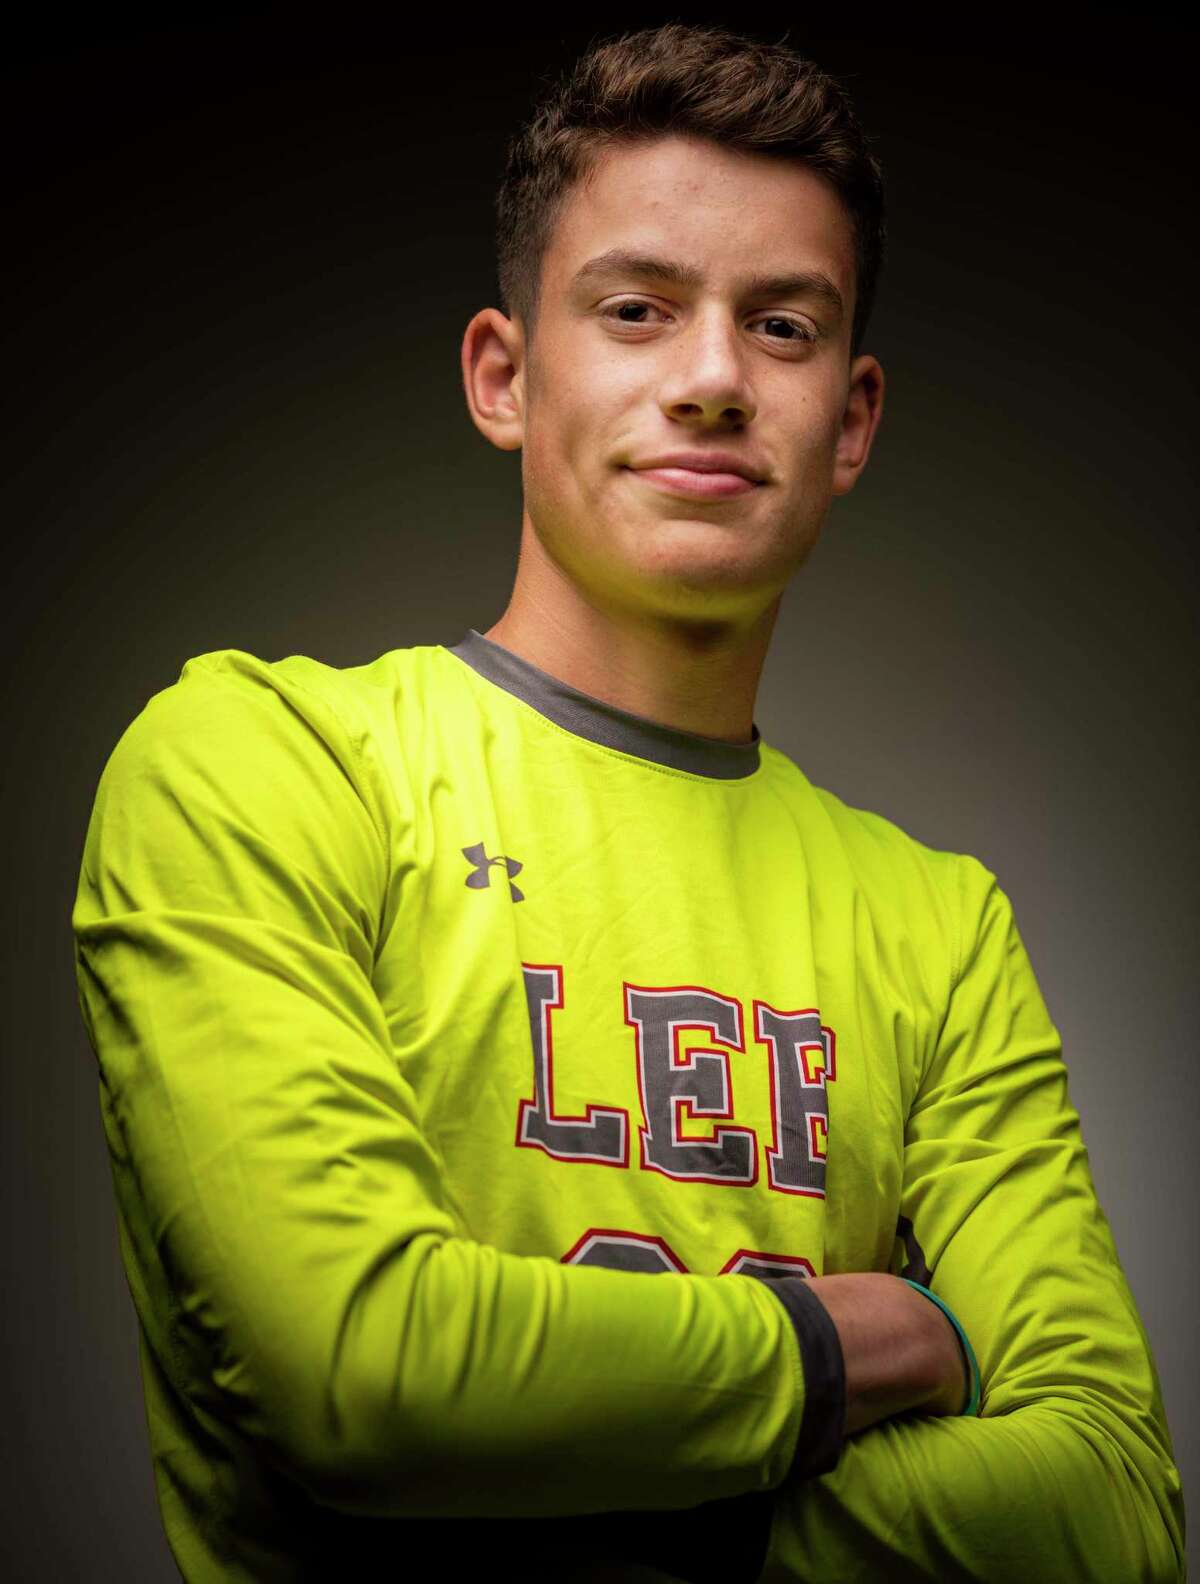 Lee's Joey Batrouni, for the Express-News' 2018-19 All-Area boys soccer team.